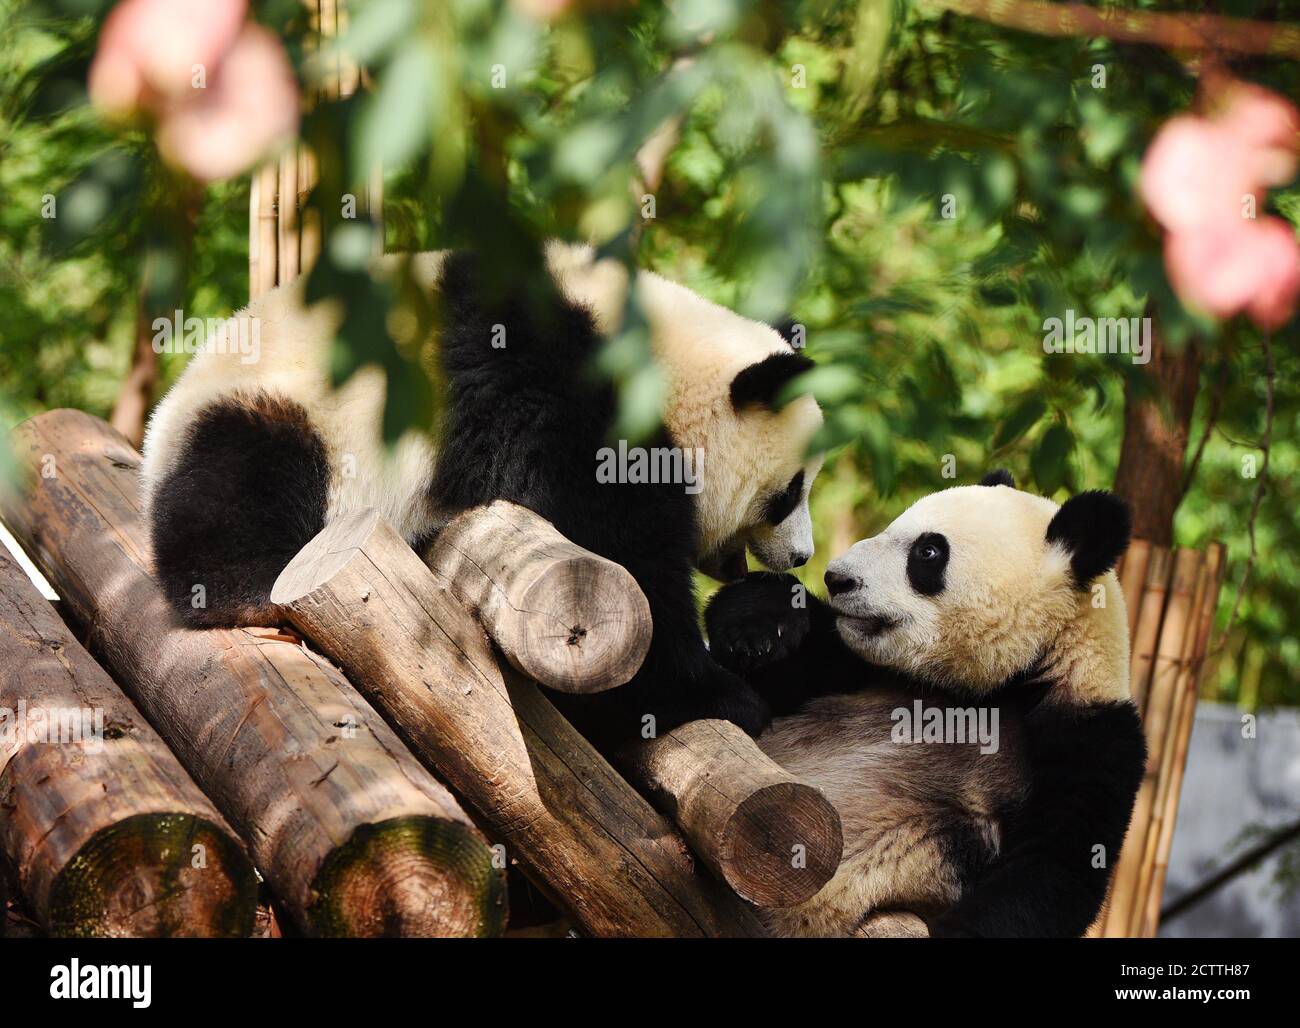 Beijing, China's Shaanxi Province. 23rd Sep, 2020. Giant pandas are seen at the Qinling research center of giant panda breeding in Zhouzhi County, northwest China's Shaanxi Province, Sept. 23, 2020. A total of 31 giant pandas live in the center at present and are taken care of by over 20 full-time feeders. Credit: Liu Xiao/Xinhua/Alamy Live News Stock Photo